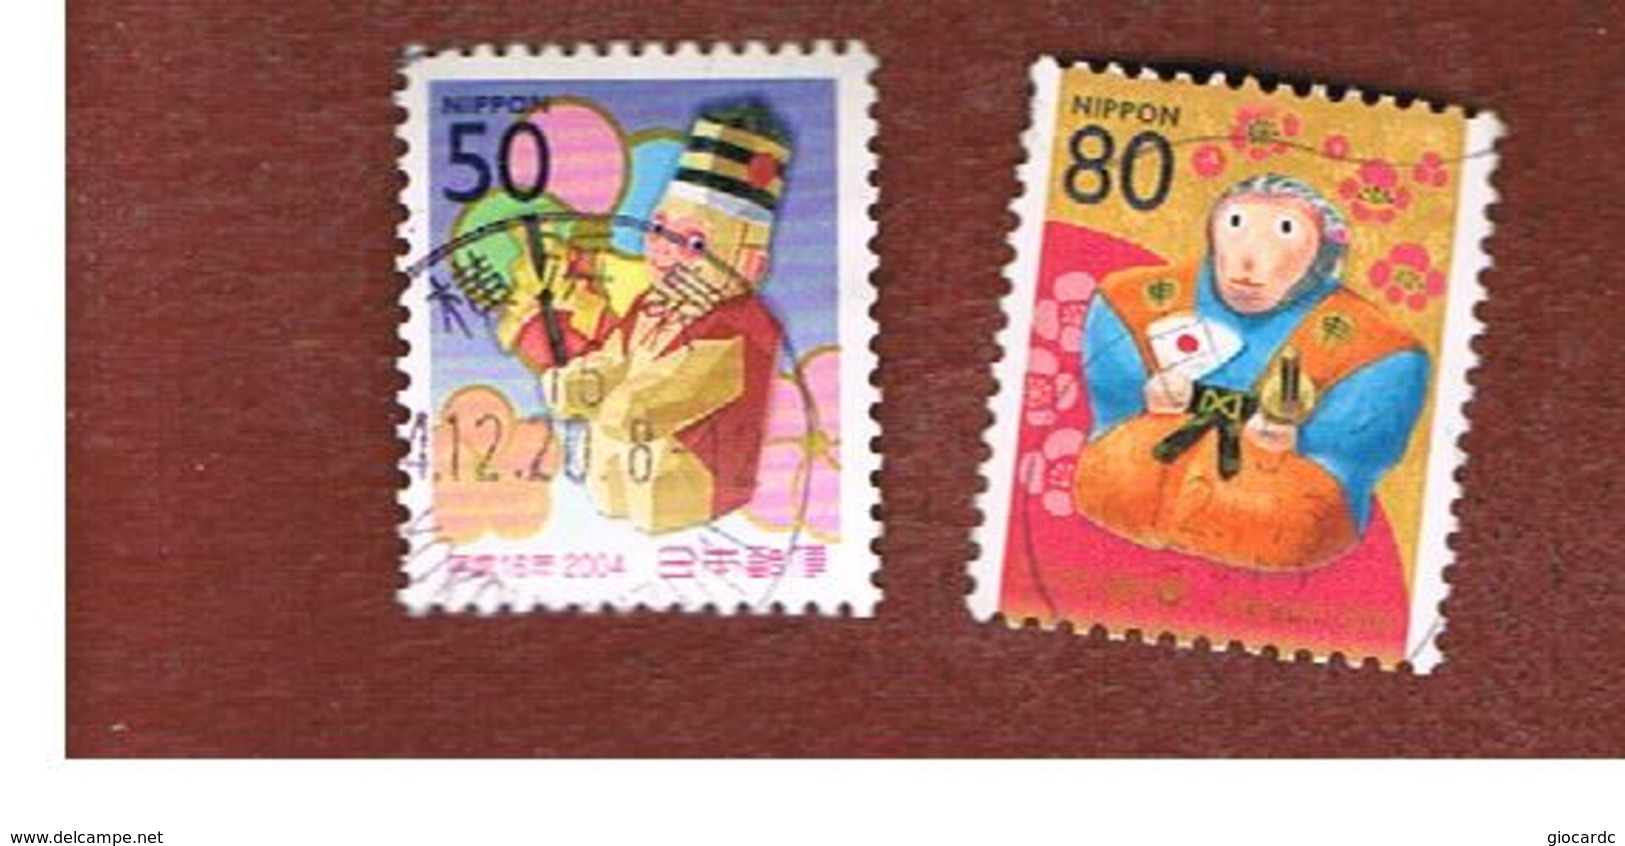 GIAPPONE (JAPAN) - SG 3188.3189  -    2003  YEAR OF THE MONKEY (COMPLET SET OF 2)    - USED° - Usati